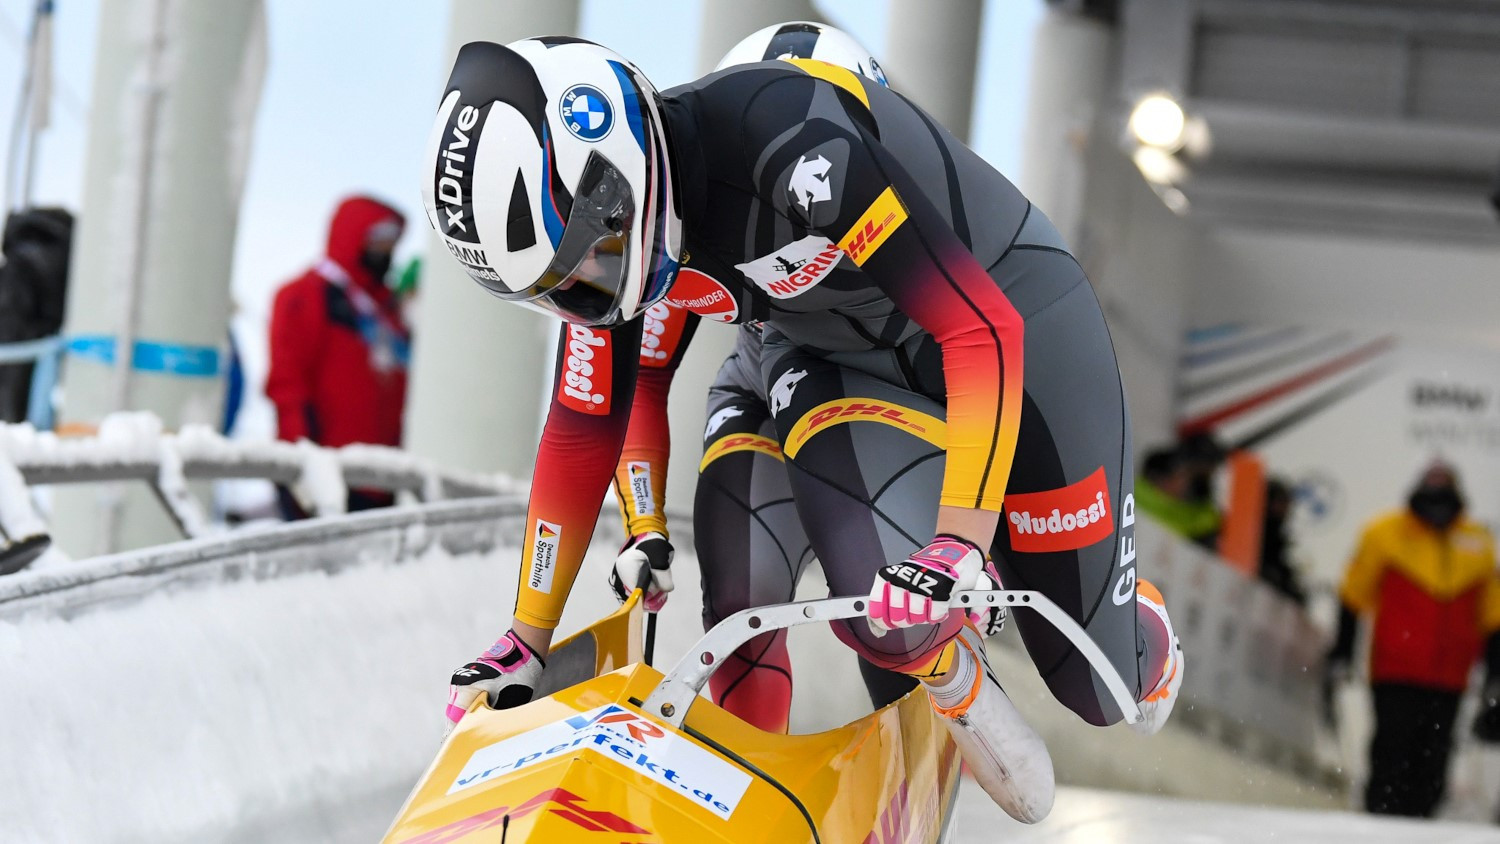 Nolte and Levi win European two-woman bobsleigh title